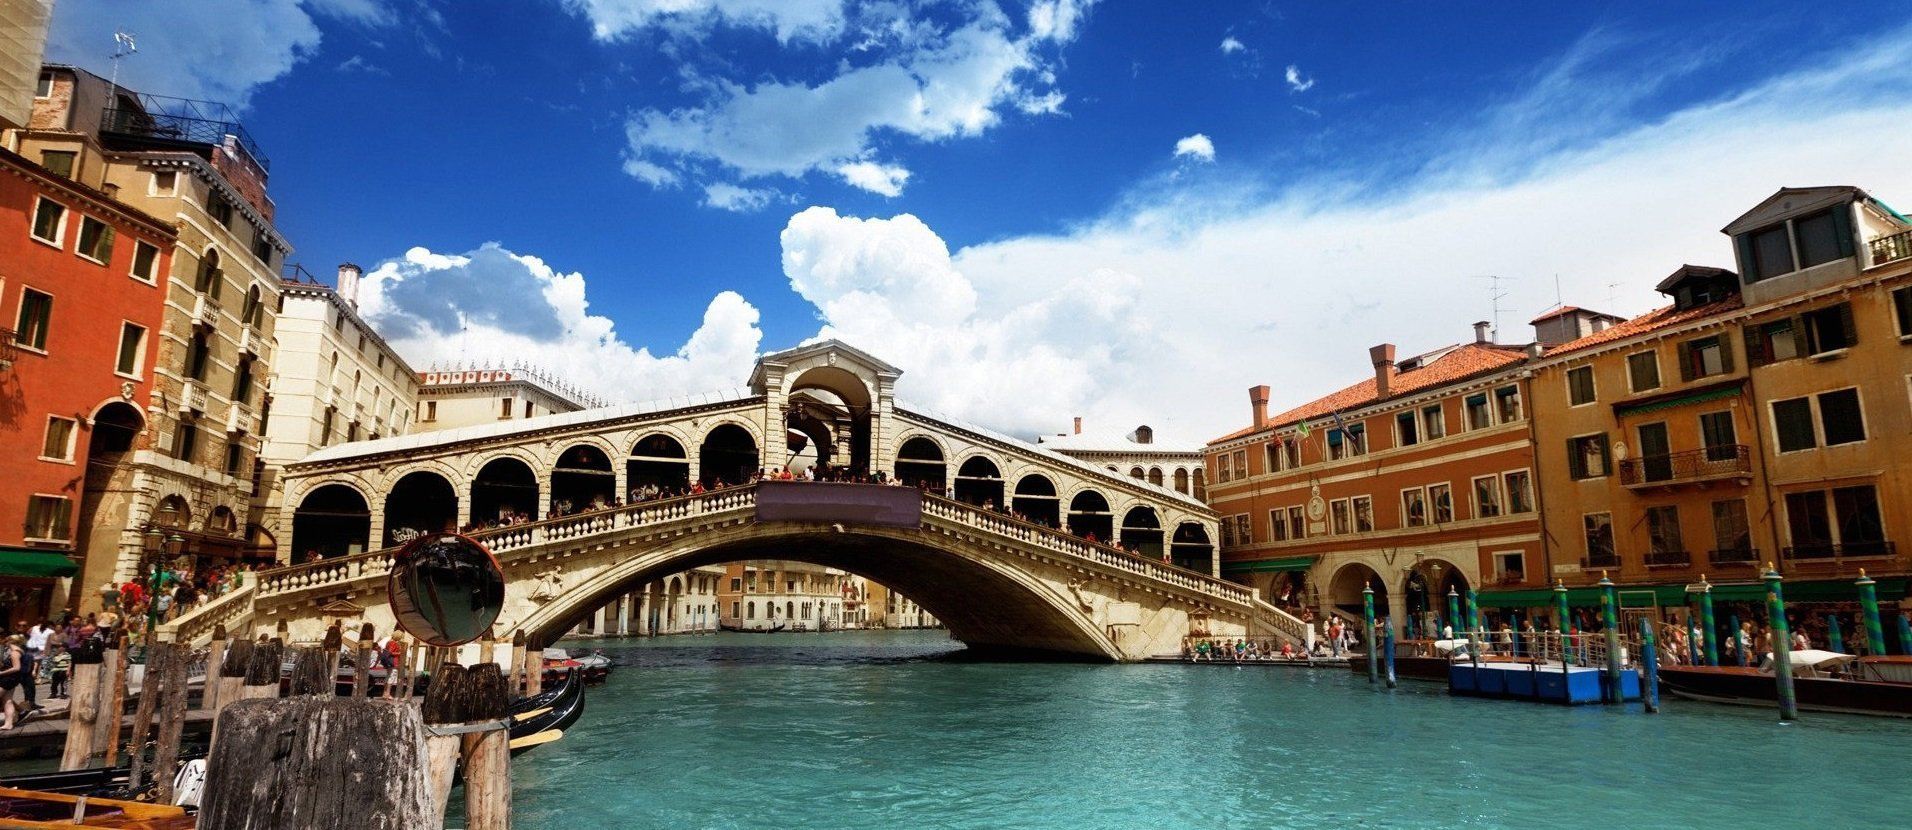 The Rialto Bridge, one of the city's most famous landmarks